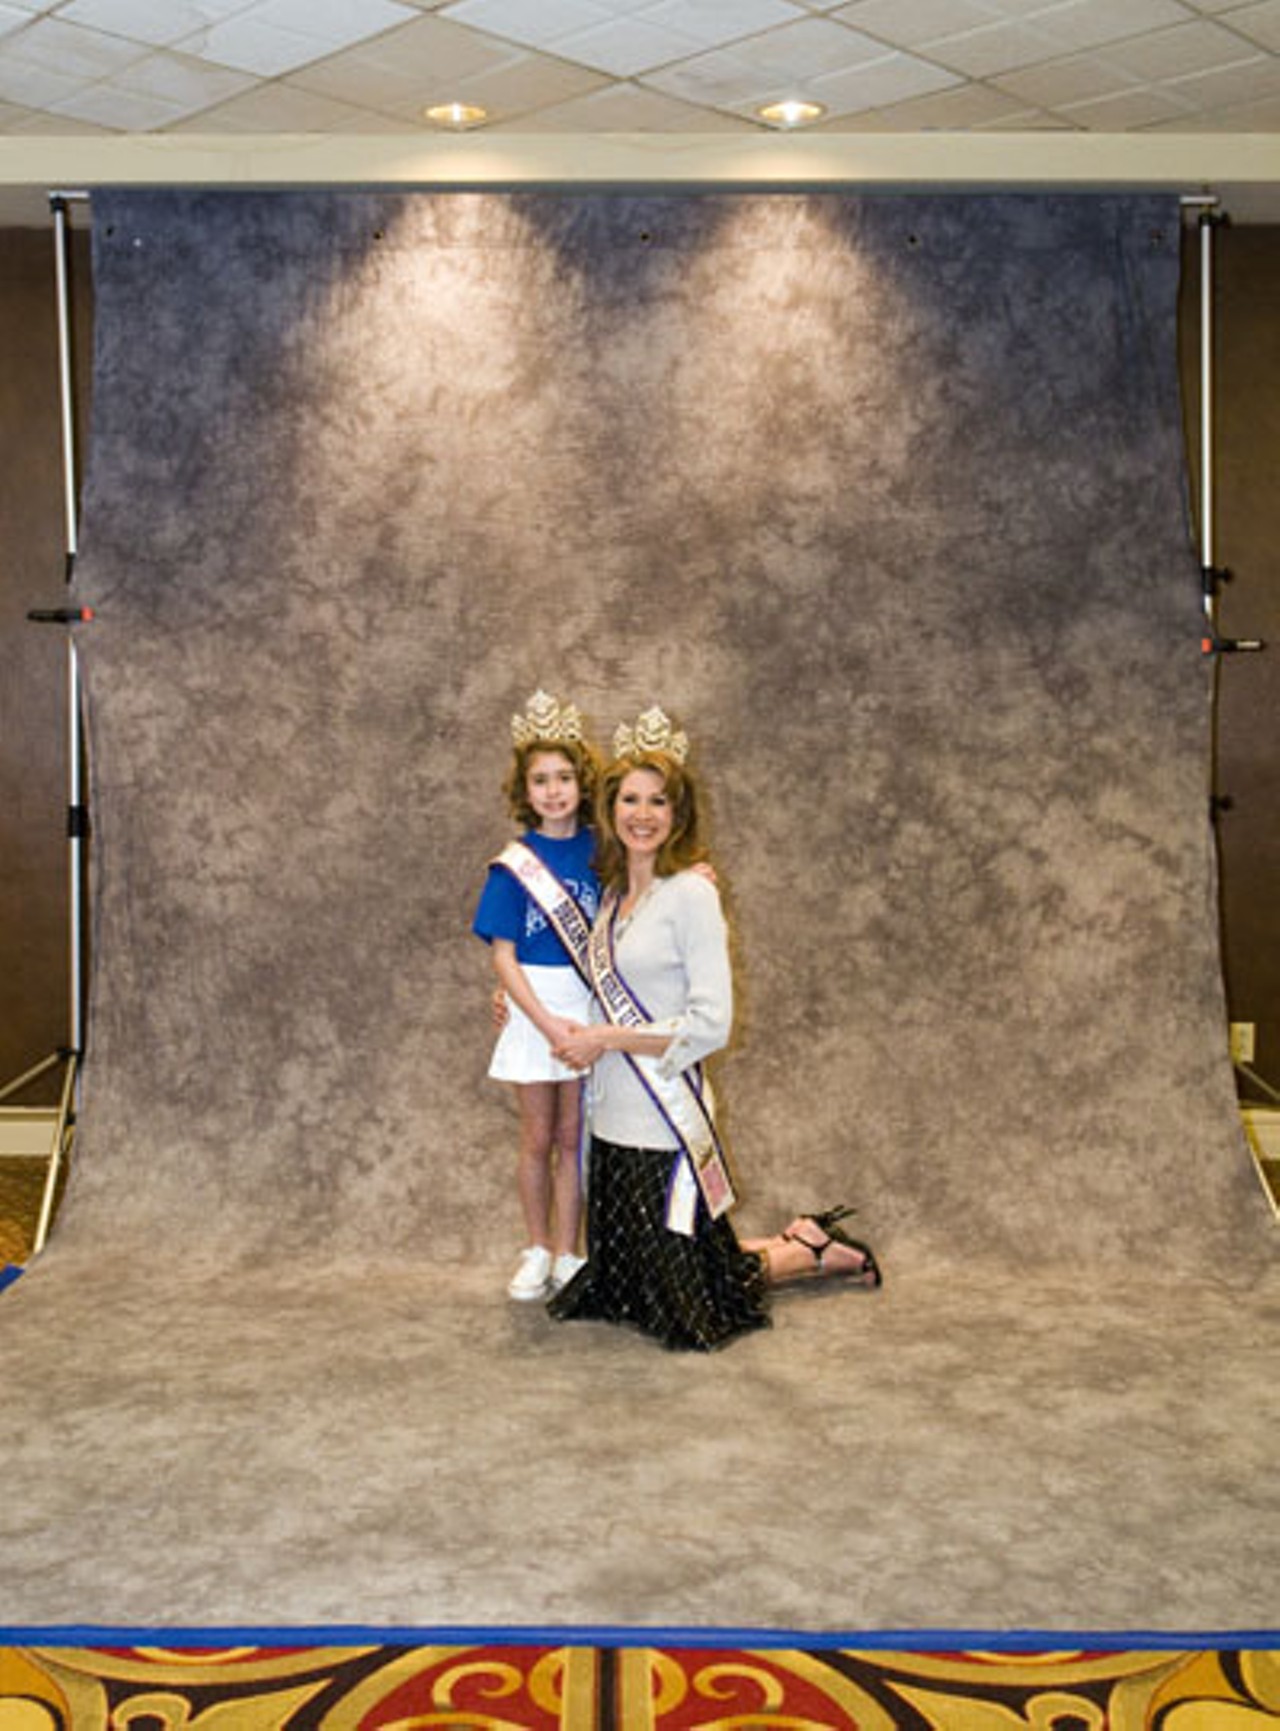 Beth and Chase Hallemann, from St. Louis, held the 2007 title of Natinal Mother/Daughter Queens in 2007. Beth now works for the Missouri Dream Girls Pageant.